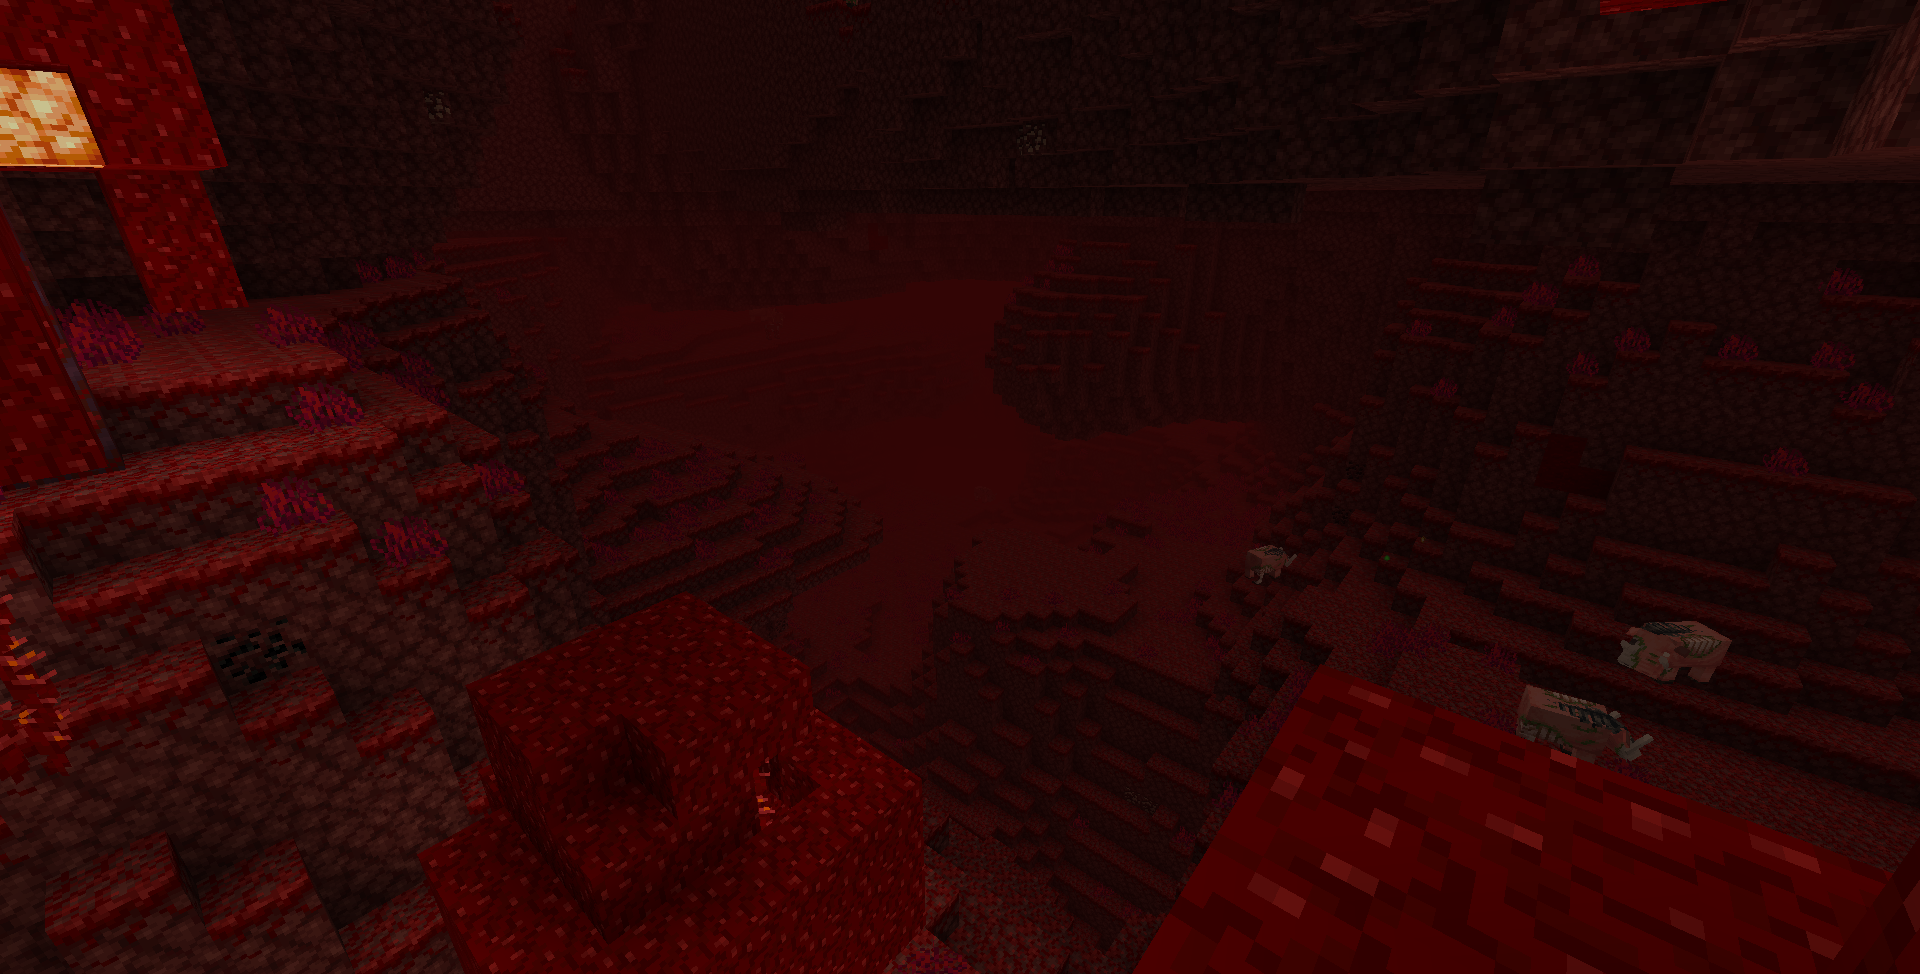 An image showing the crimson valley biome.